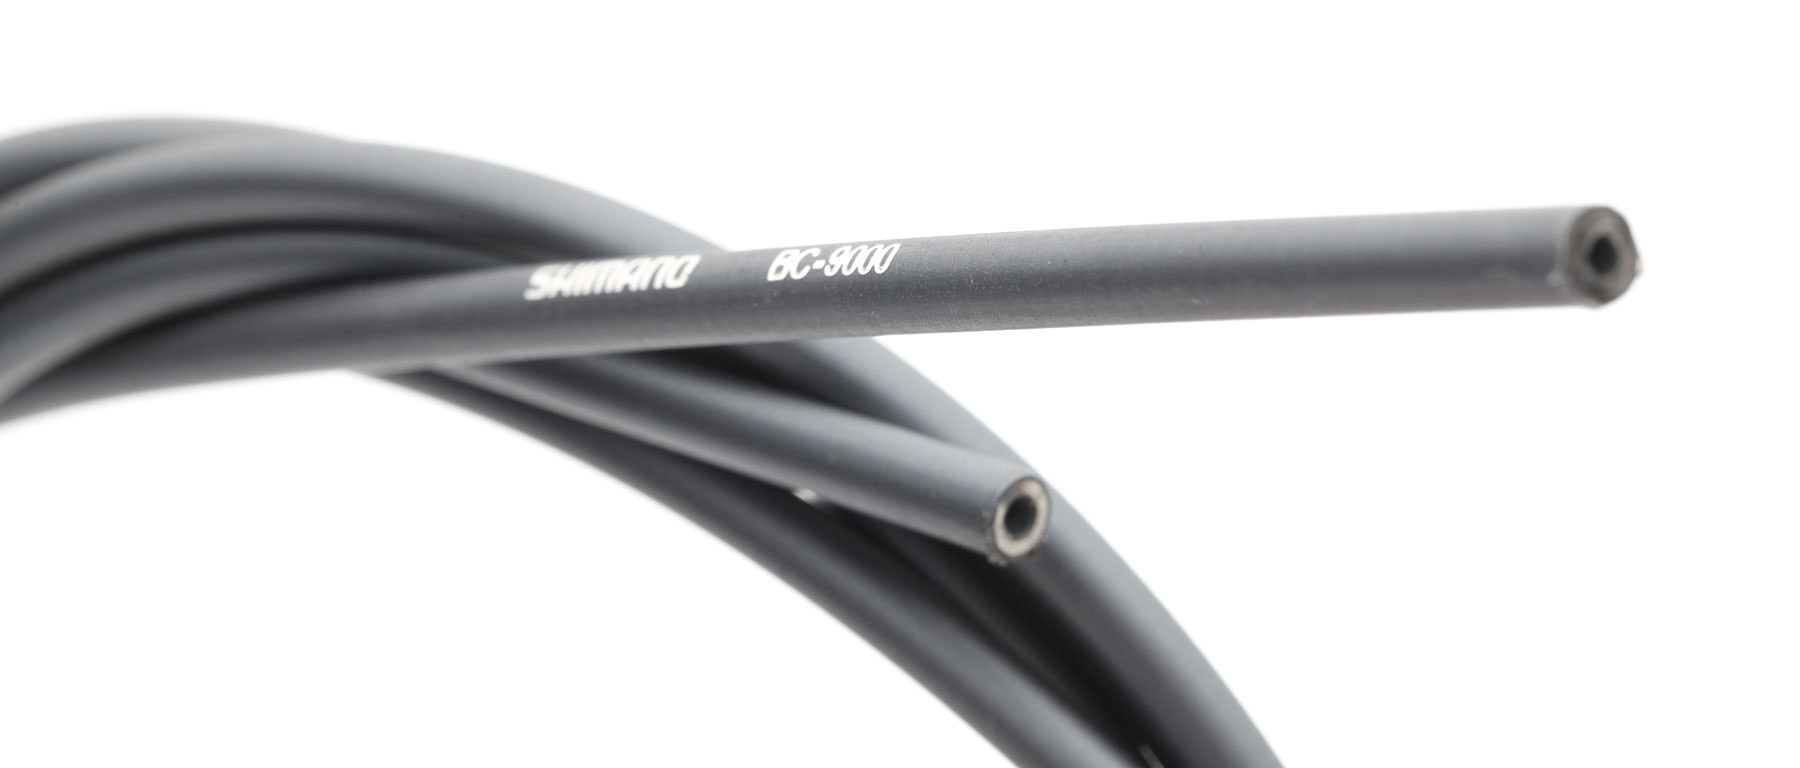 Shimano BC-9000 Polymer Coated Road Brake Cableset